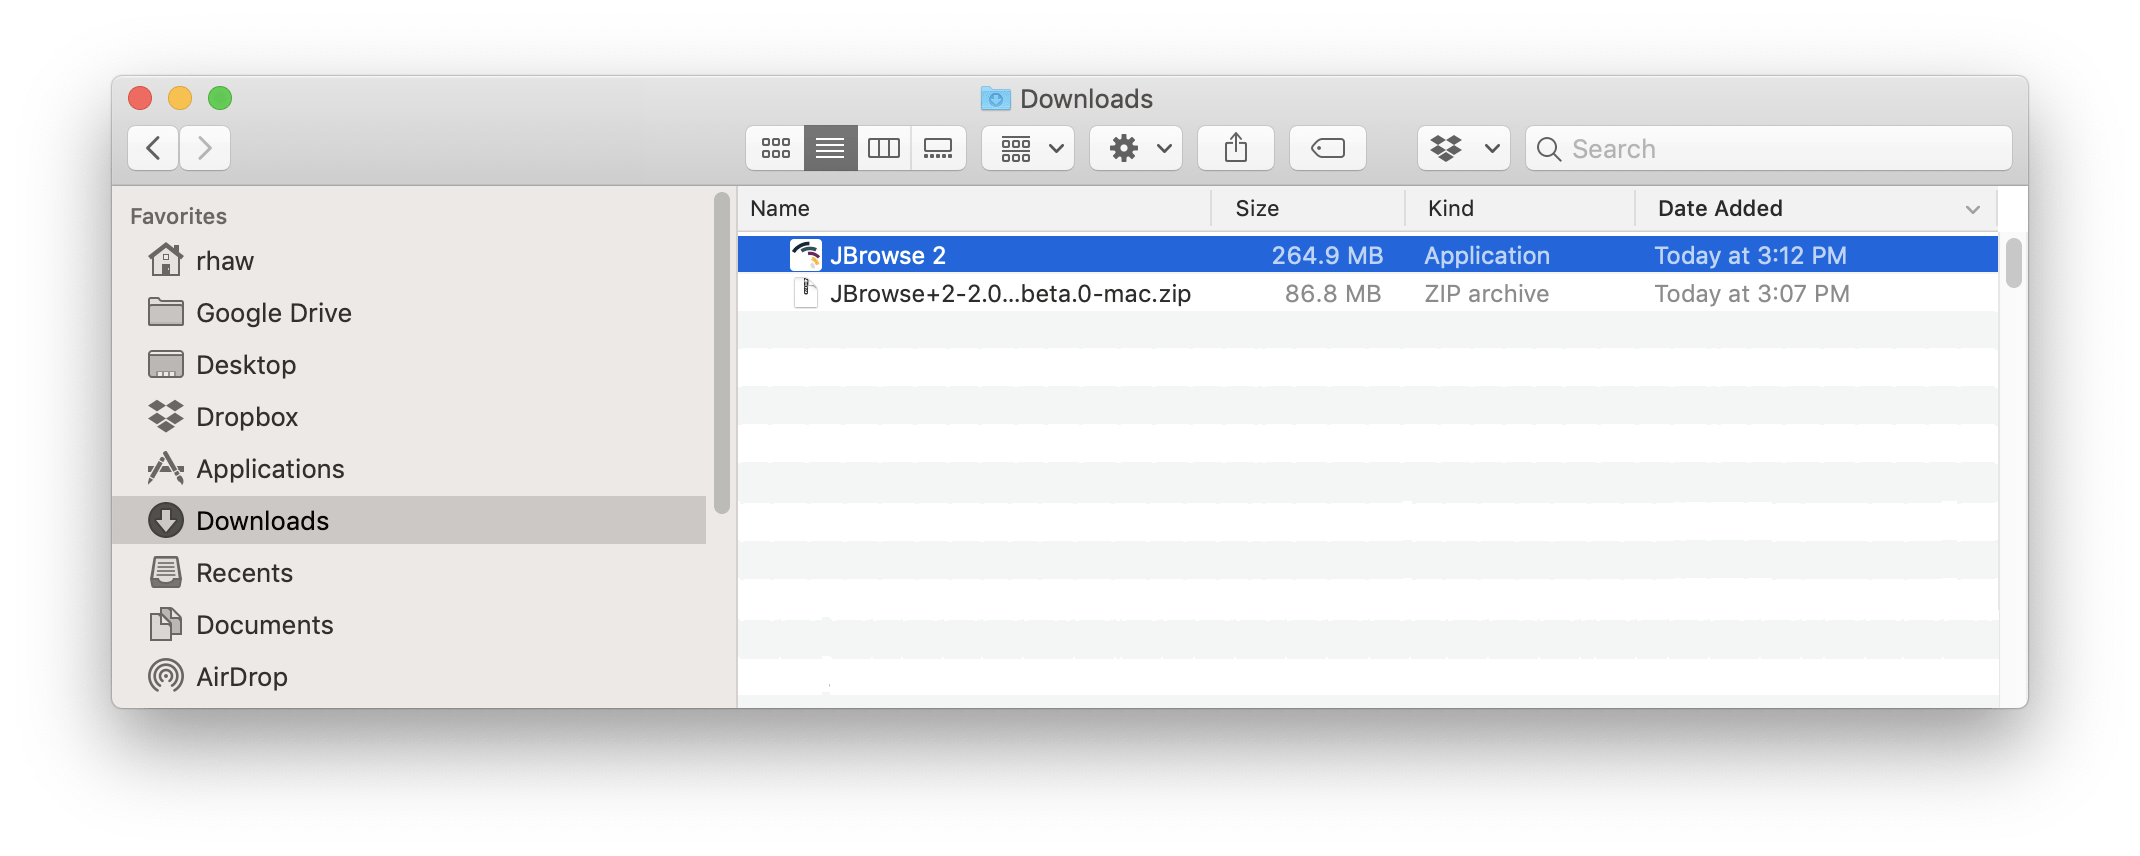 svs file viewer for mac